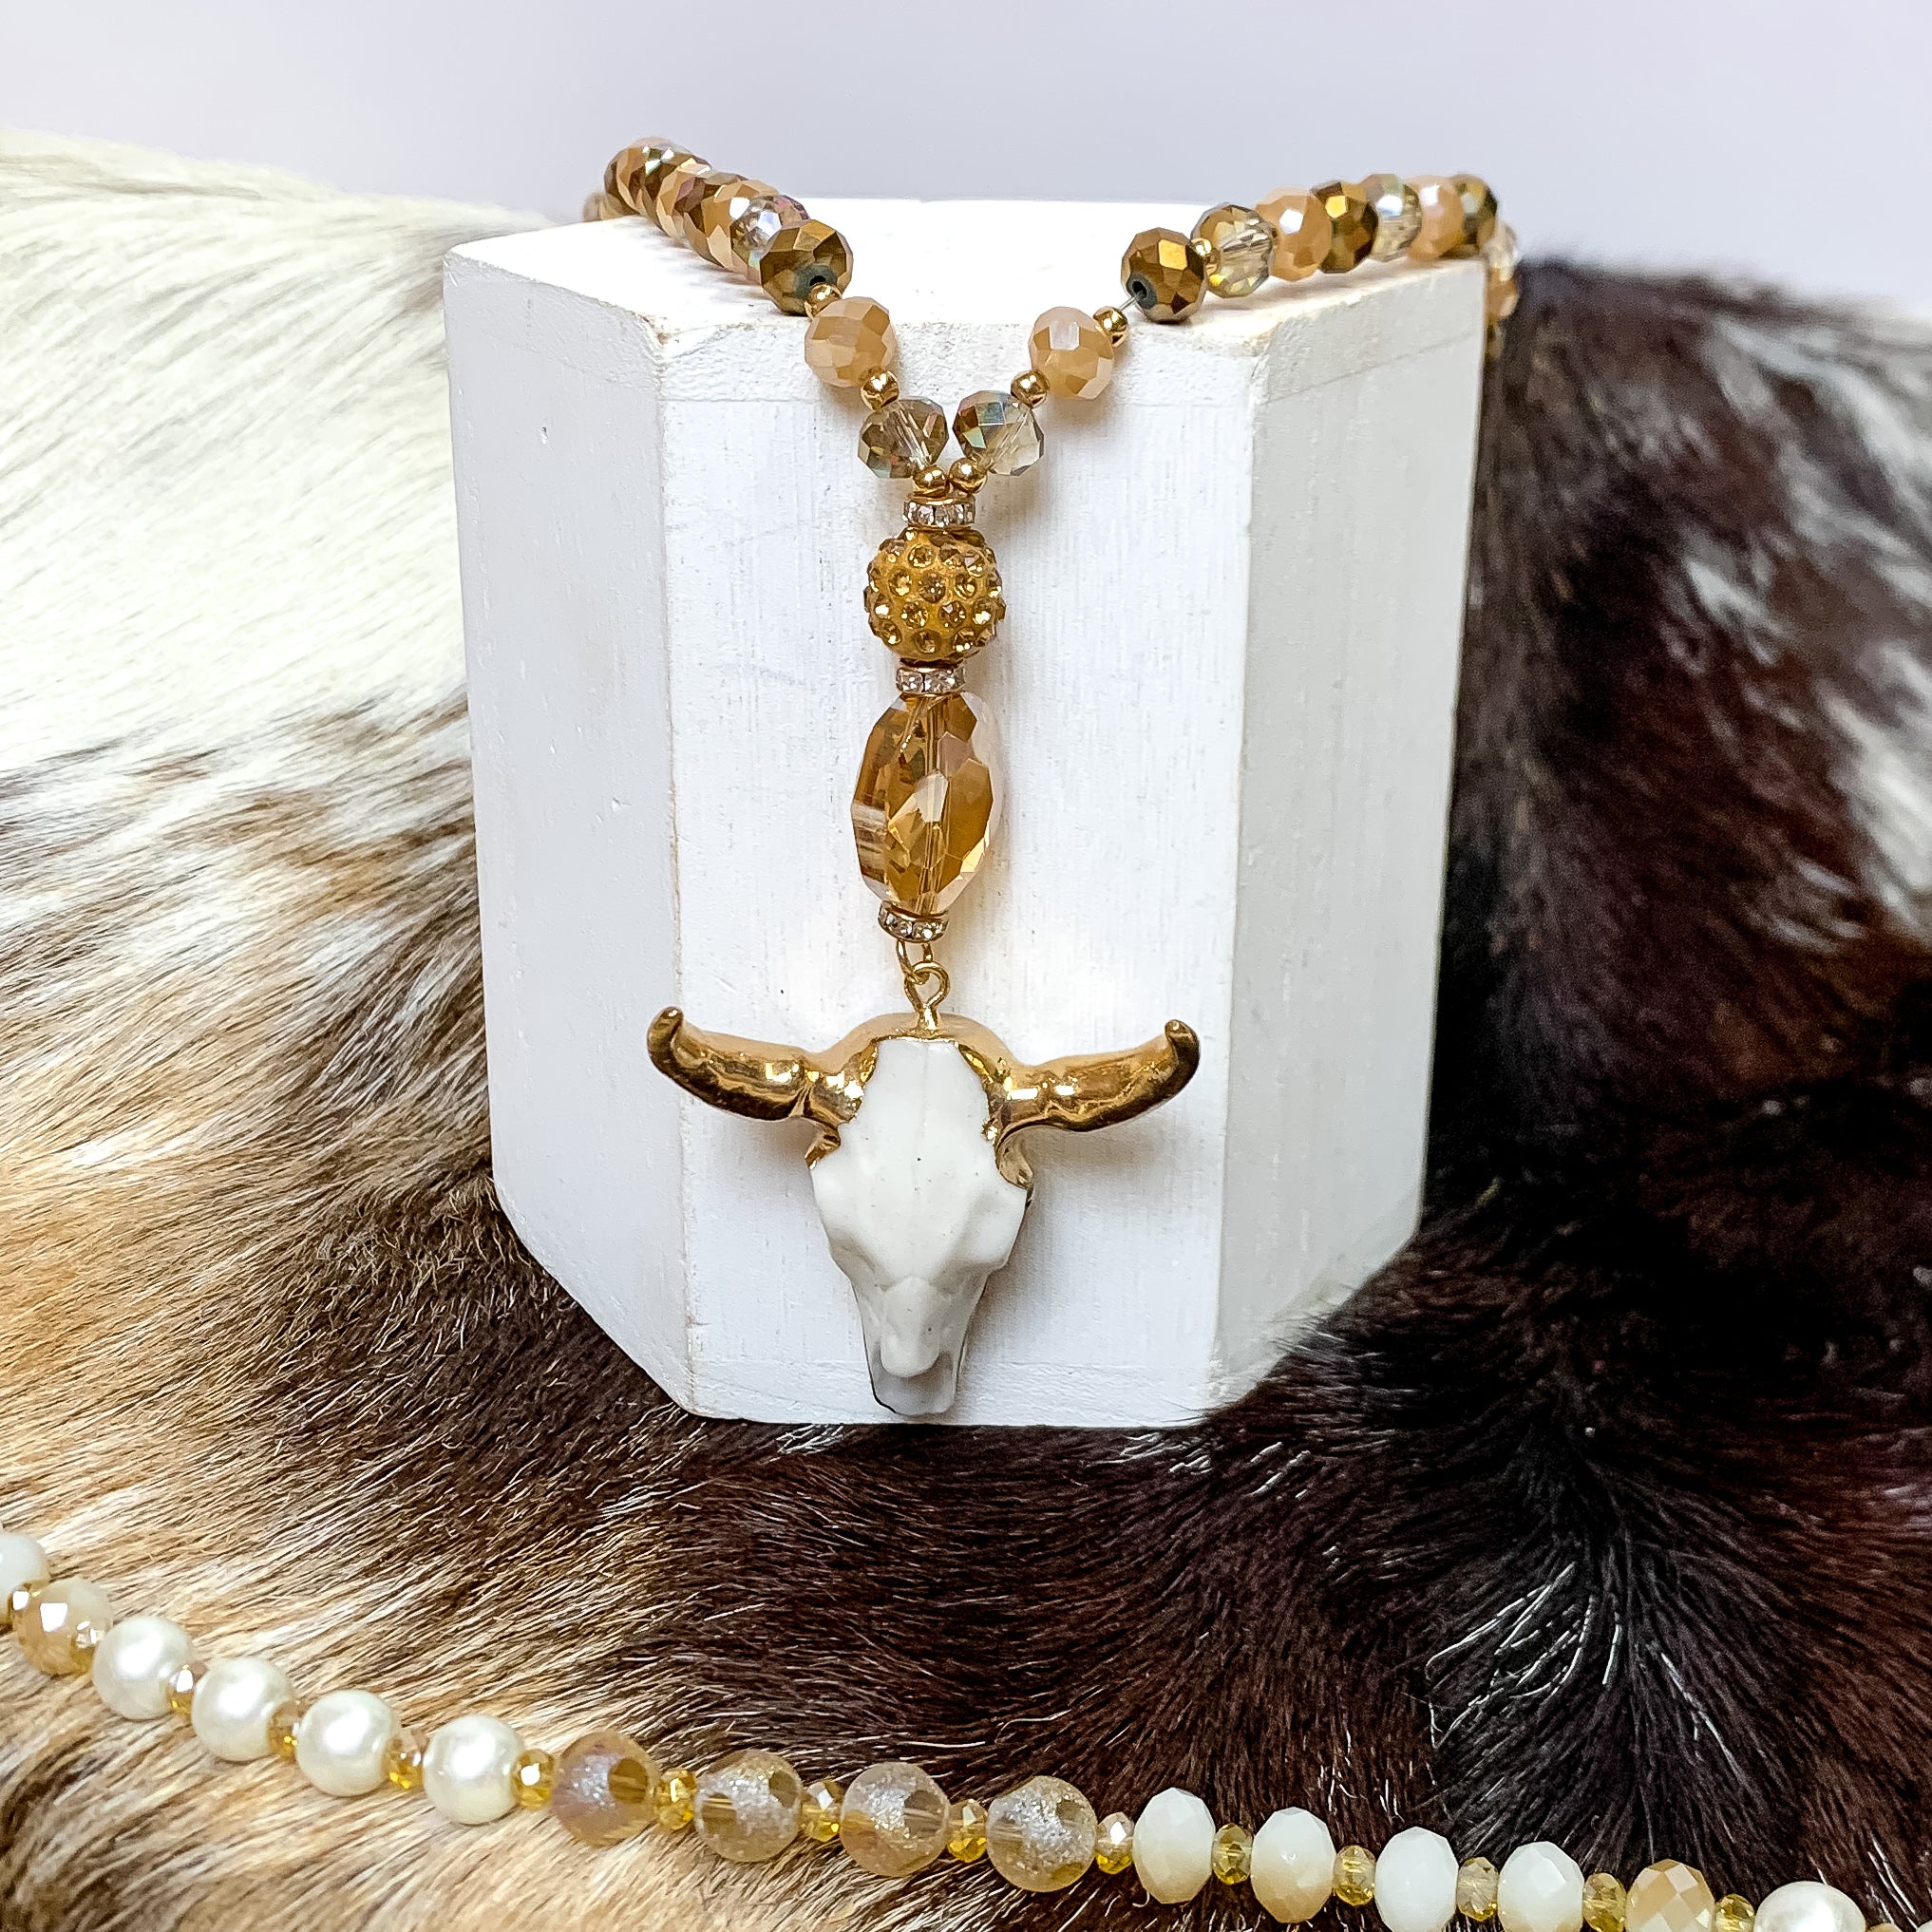 Crystal Beaded Necklace with Ivory and Gold Bull Pendant